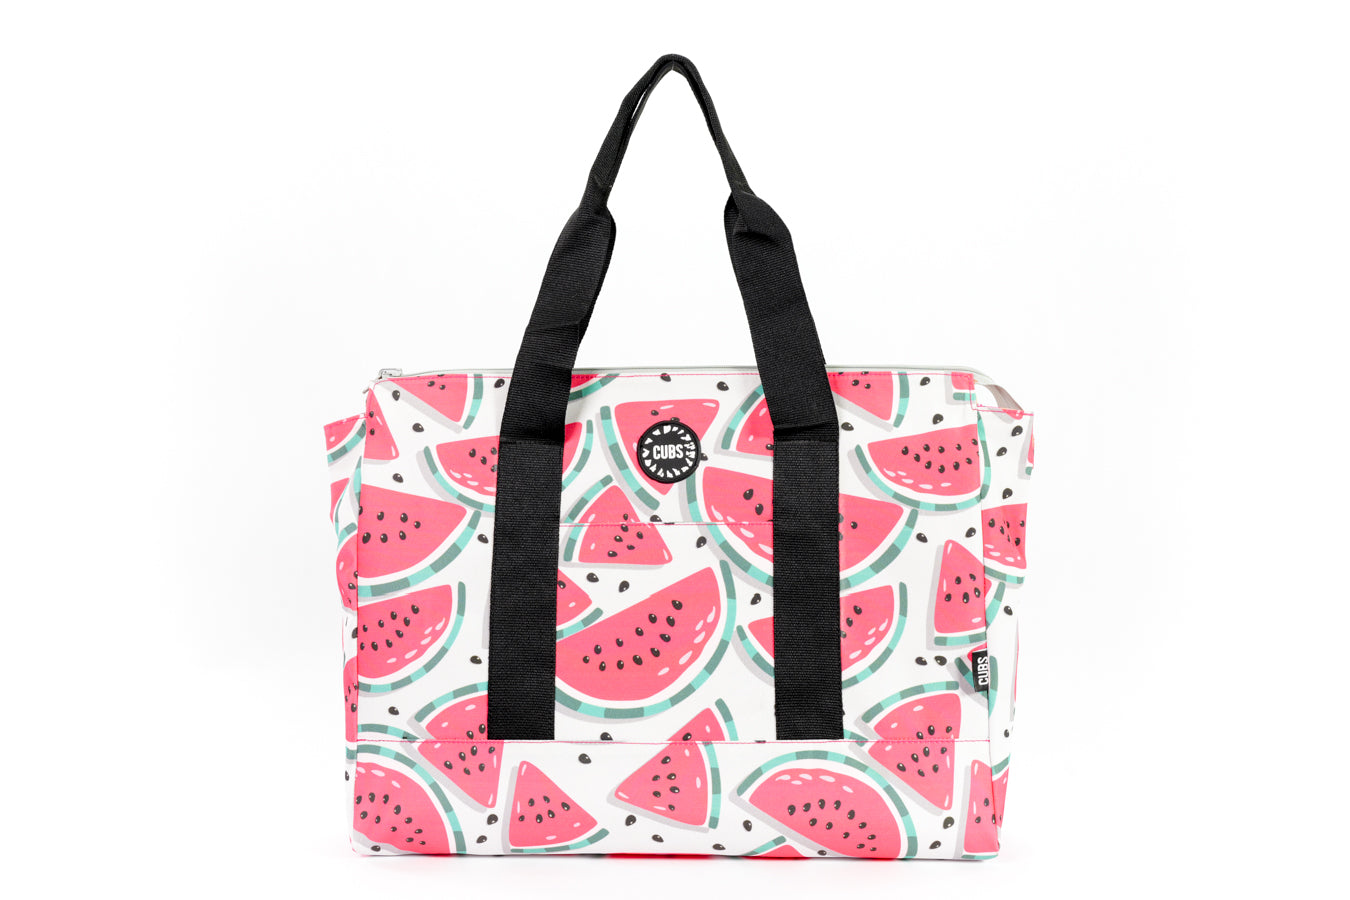 Melons and Pies women tote bag